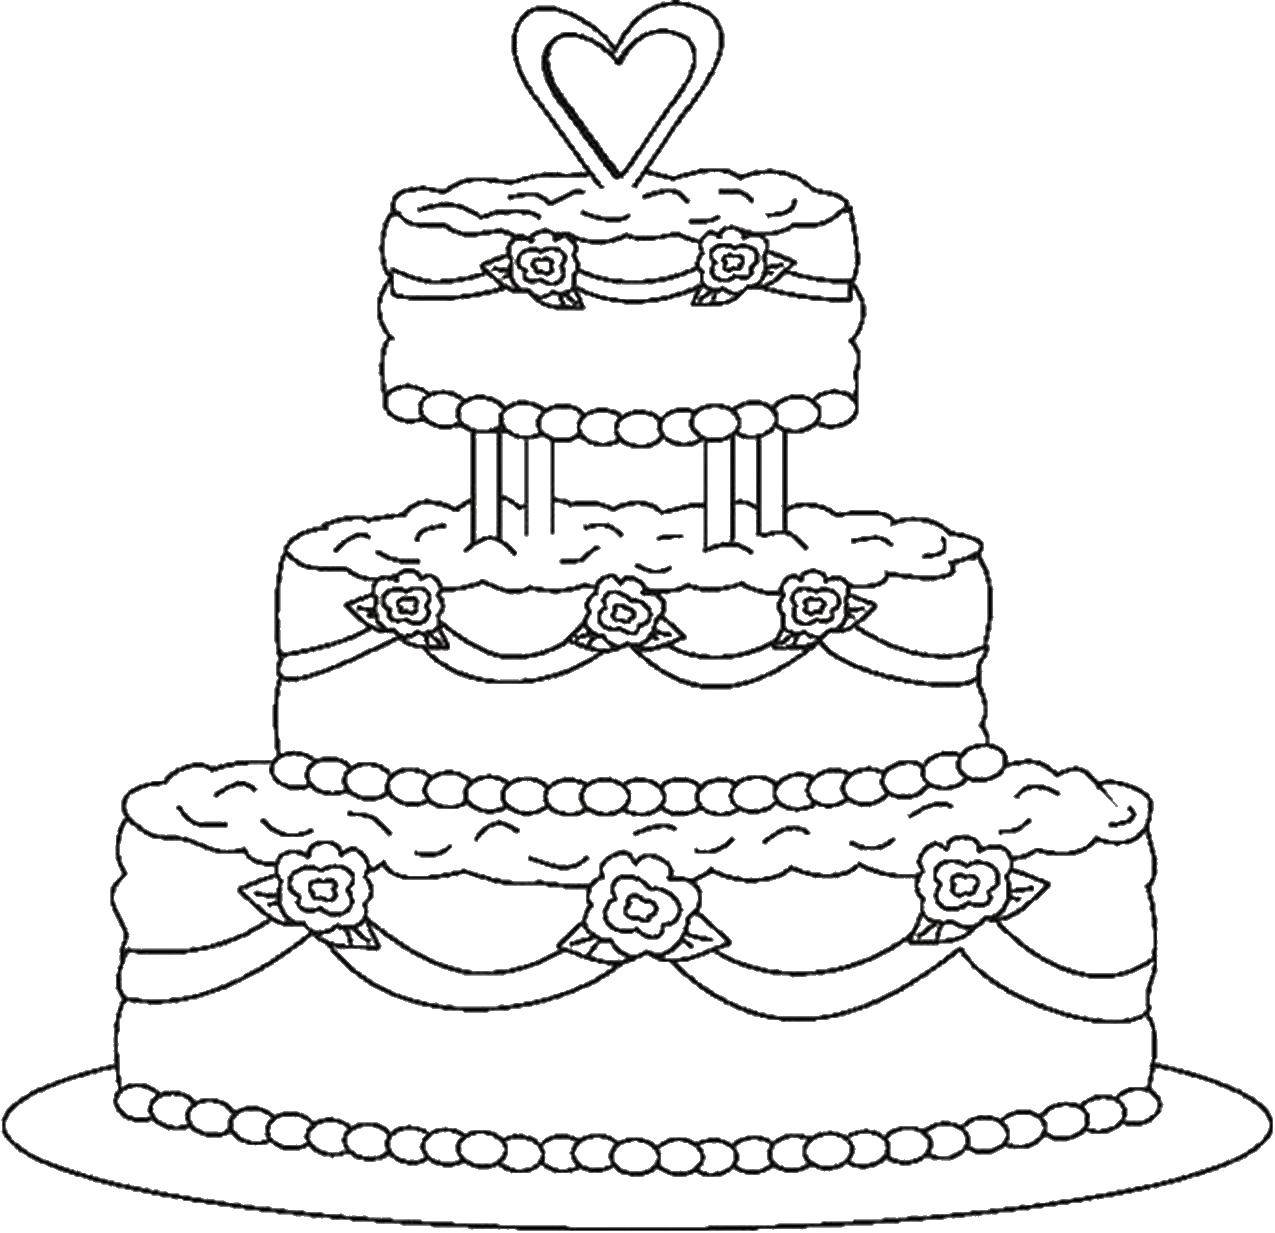 Coloring Wedding cake.. Category cakes. Tags:  Cake, food, holiday.